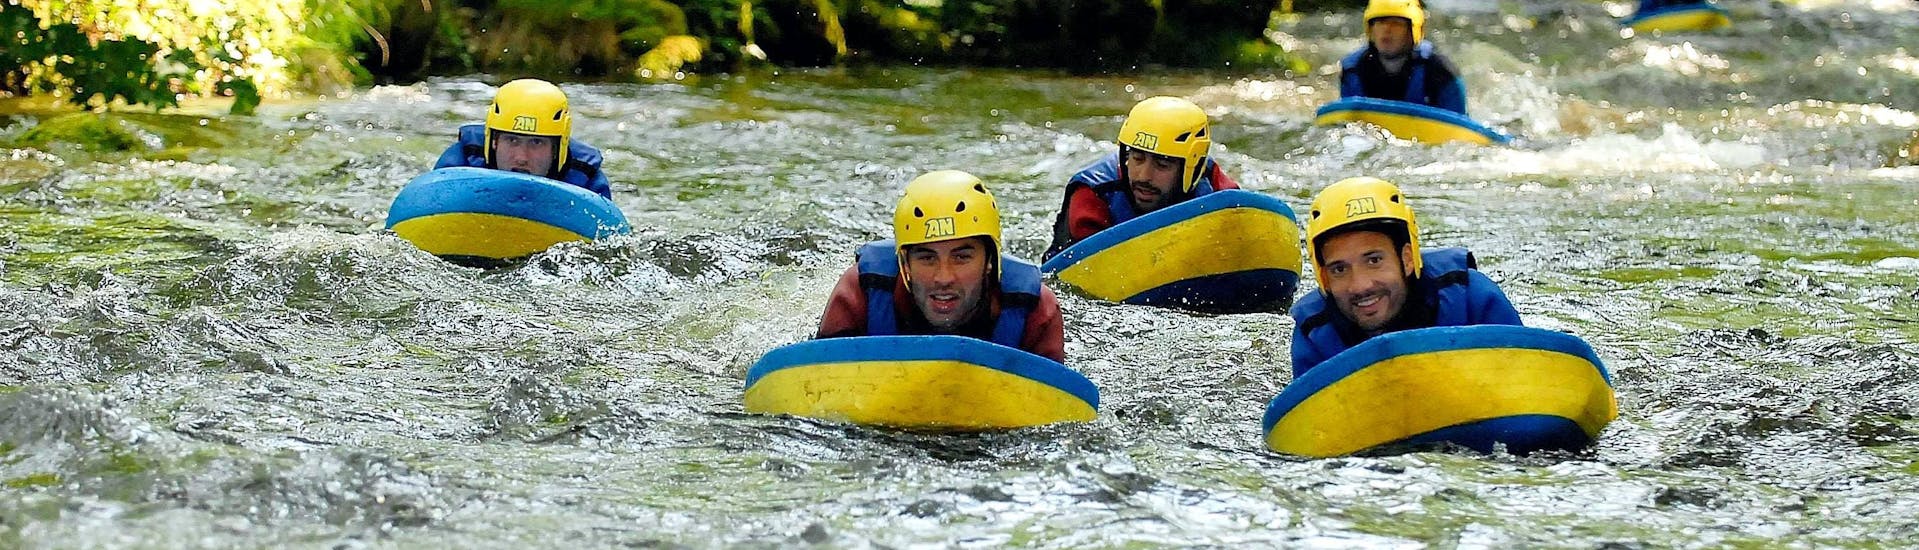 Some friends are trying to stay afloat during their Hydrospeed on Le Chalaux River - Action tour with AR Rafting Morvan.